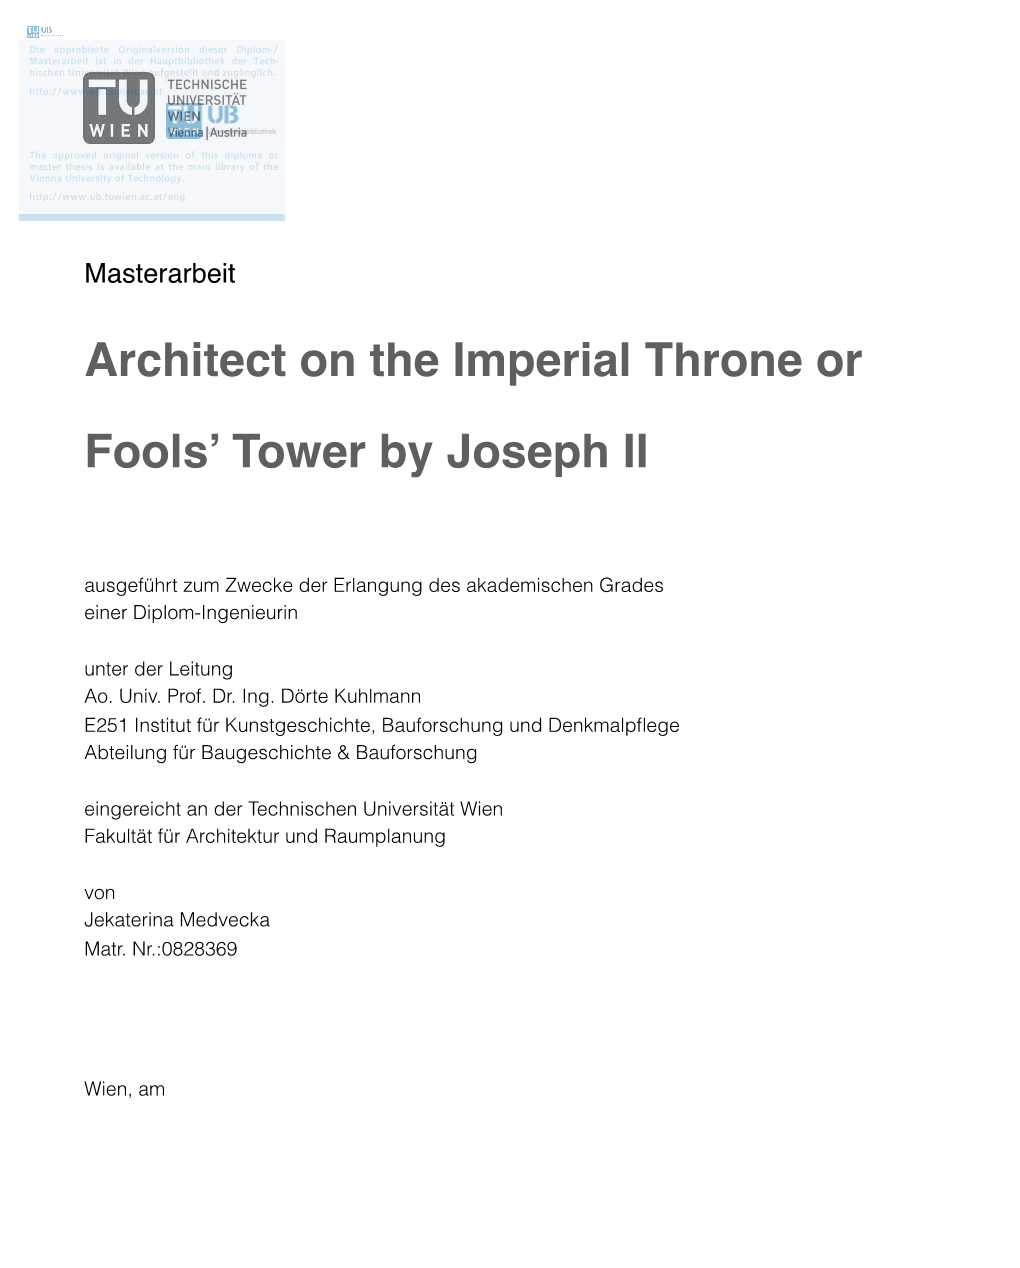 Architect on the Imperial Throne Or Fools' Tower by Joseph II.Pages